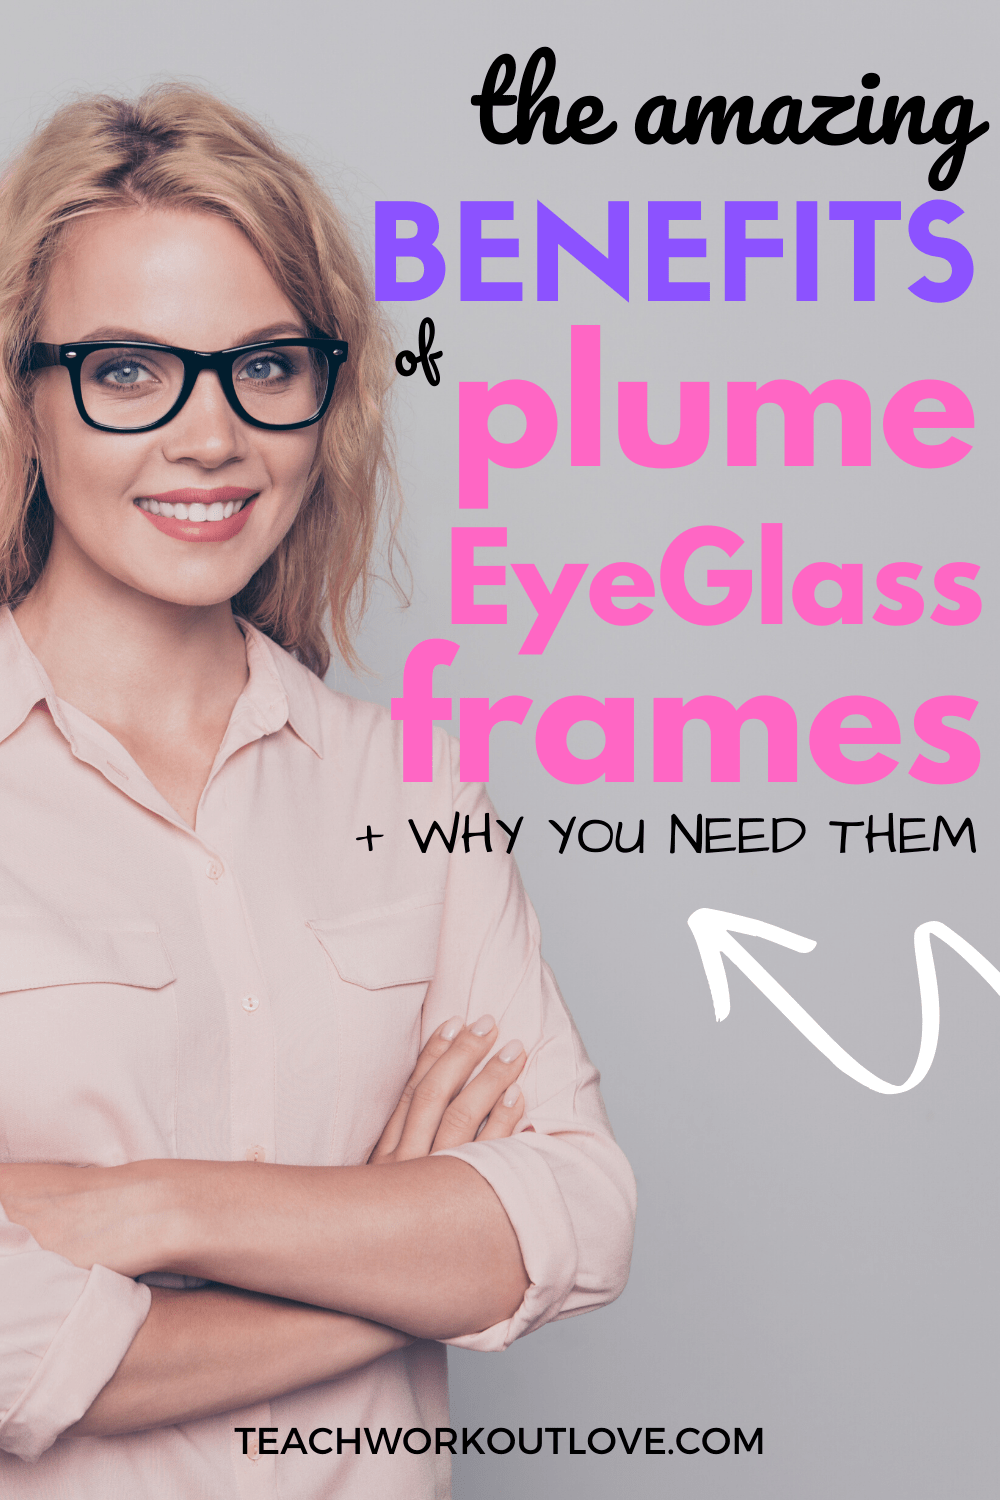 A new line of eyeglass frames called Plume has made its way to stores. Now, what are they and how can they benefit glasses wearers? Read the article below.